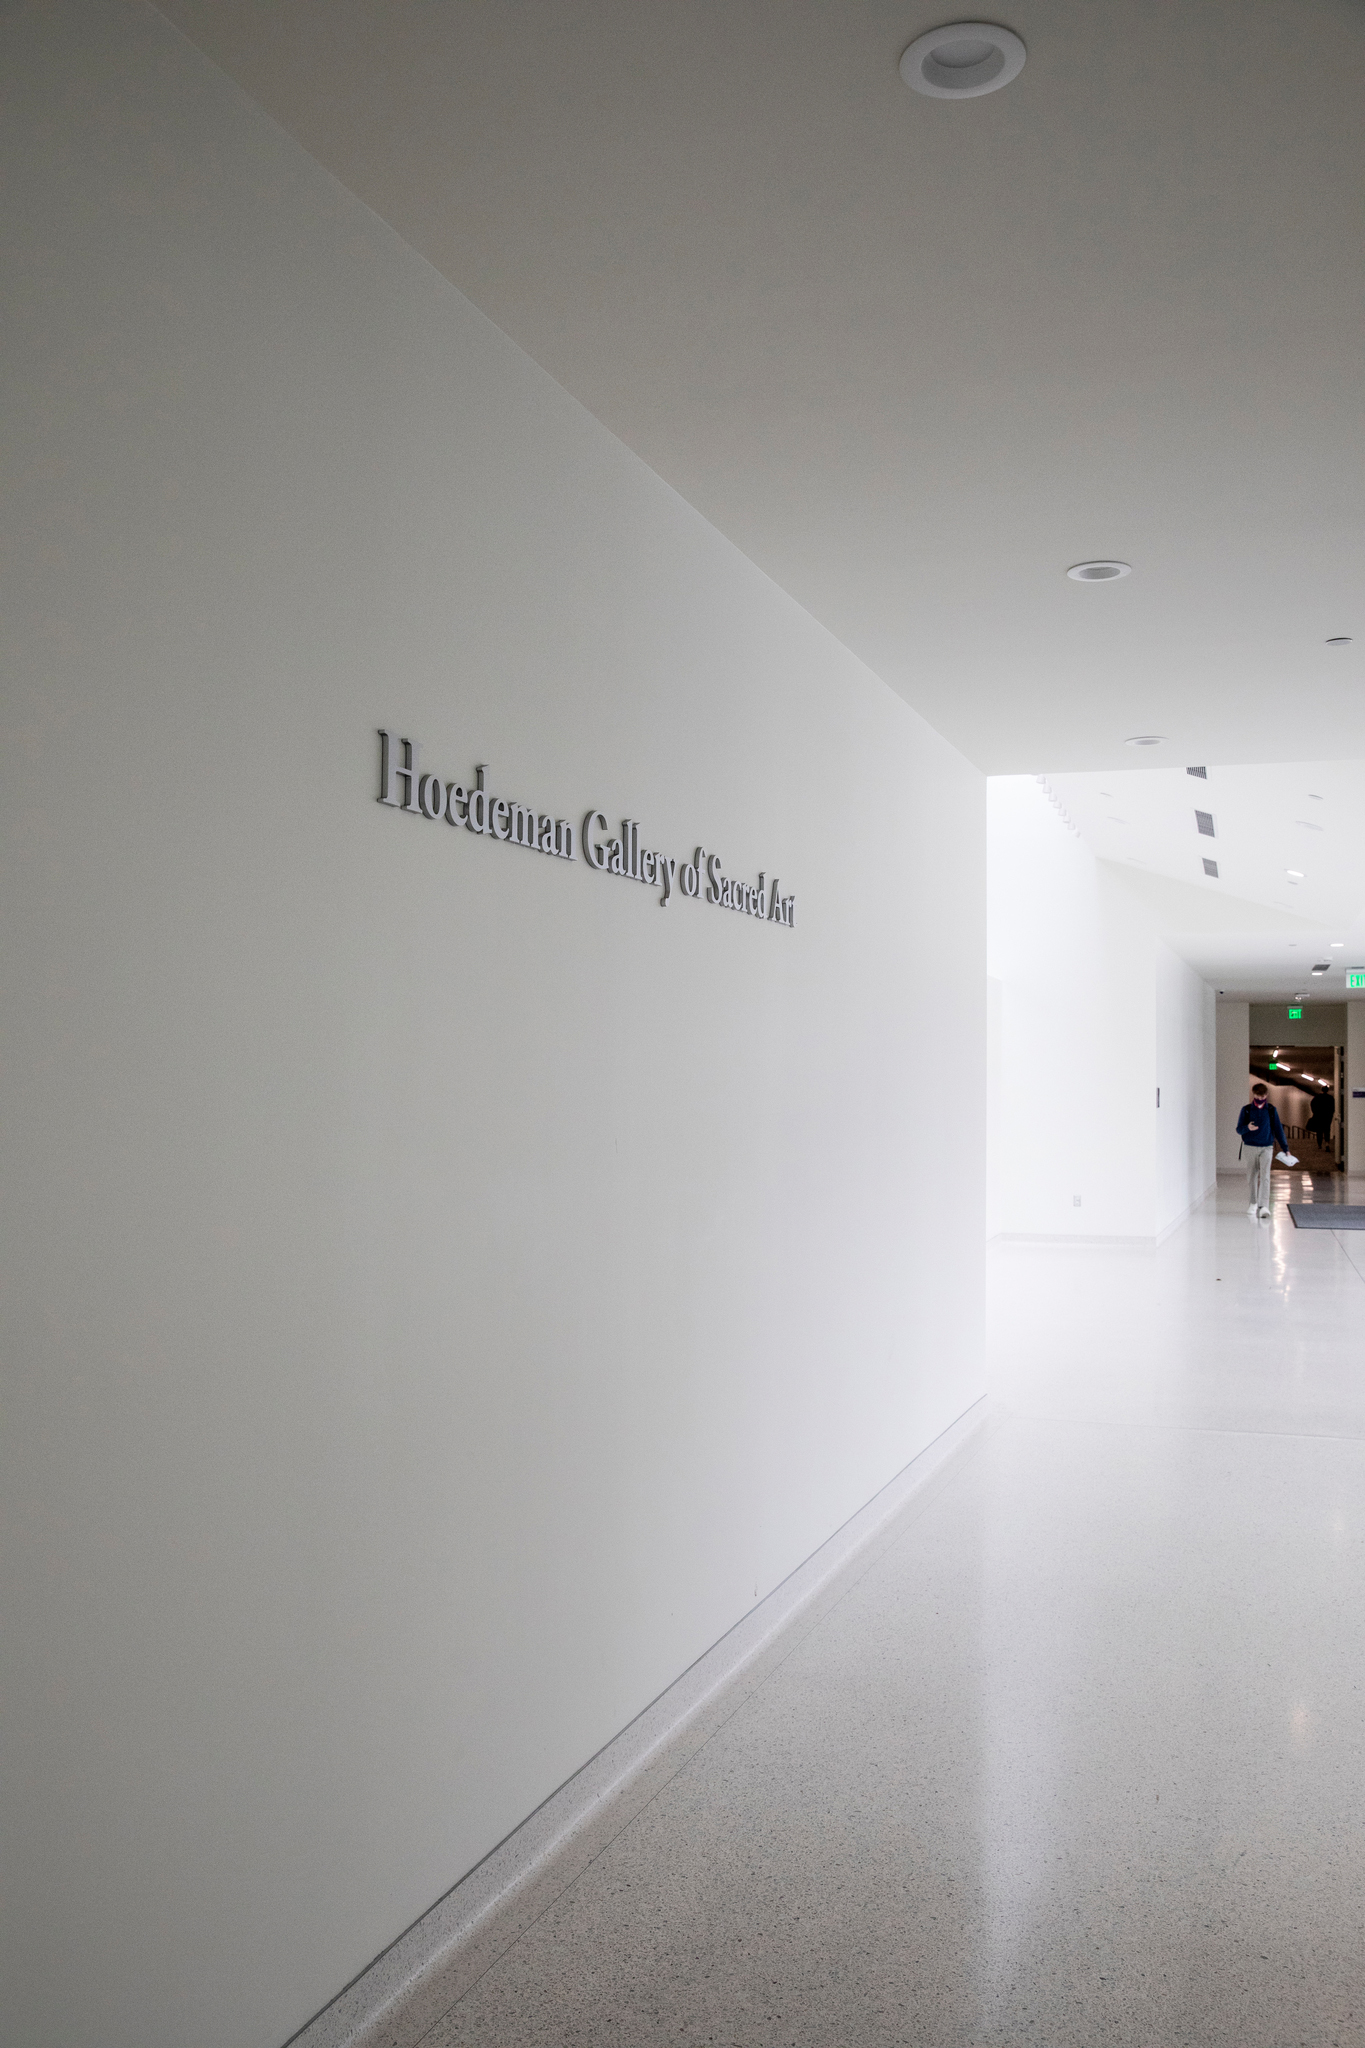 Signage in the Hoedeman Gallery of Sacred Art